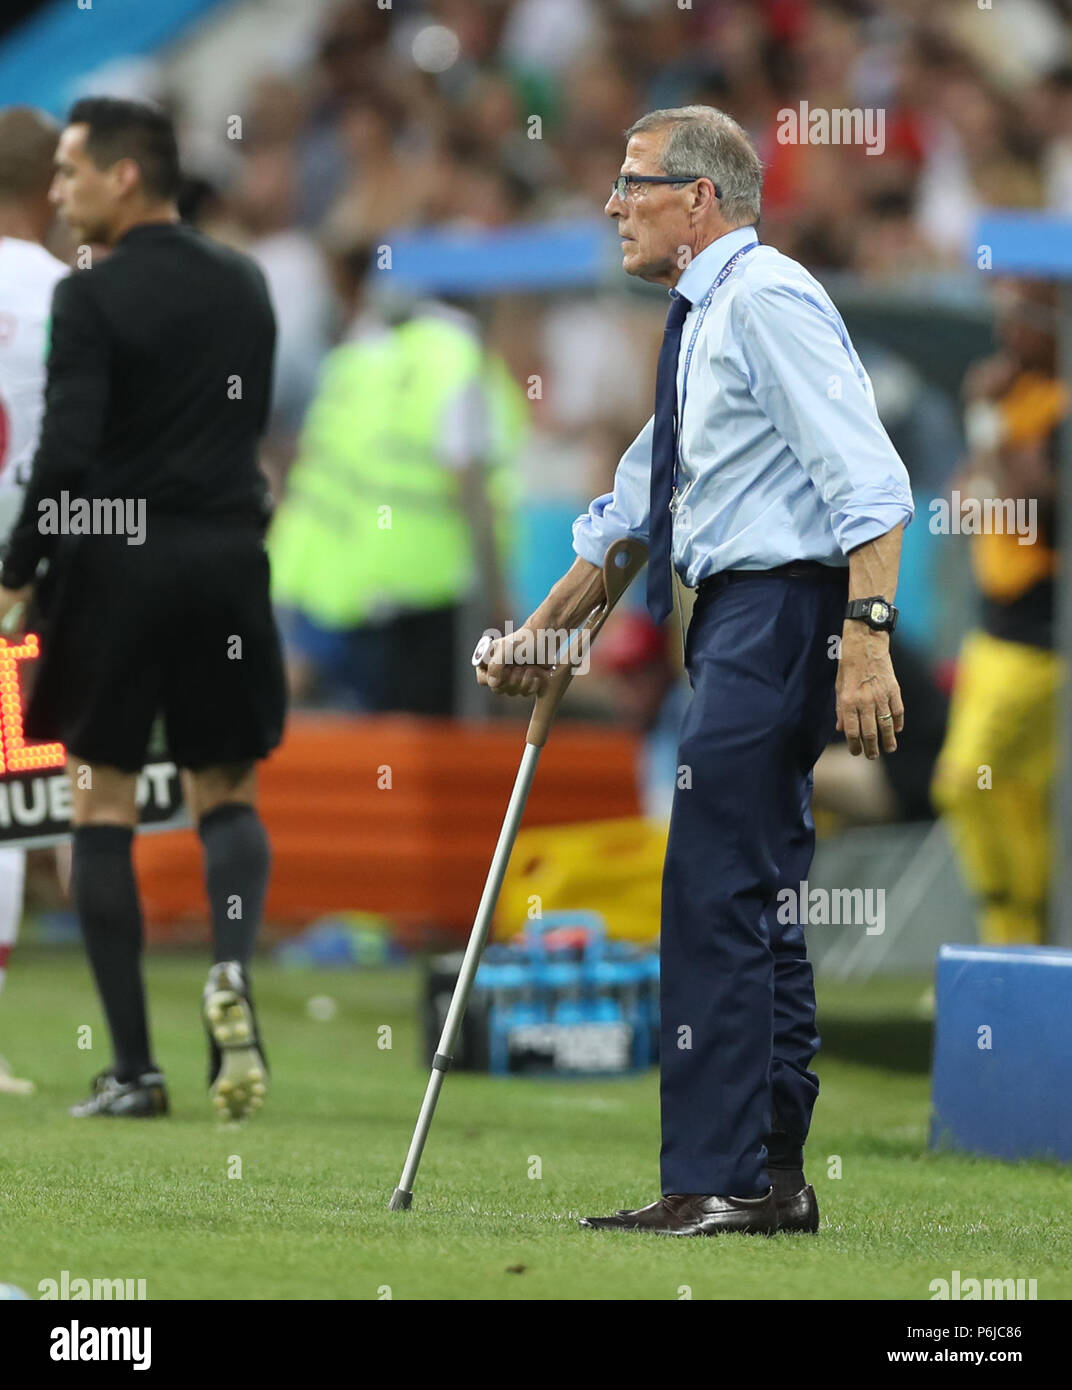 Sochi, Russia. 30th June, 2018. Head coach Oscar Tabarez of Uruguay is seen during the 2018 FIFA World Cup round of 16 match between Uruguay and Portugal in Sochi, Russia, June 30, 2018. Uruguay won 2-1 and advanced to the quarter-final. Credit: Fei Maohua/Xinhua/Alamy Live News Stock Photo